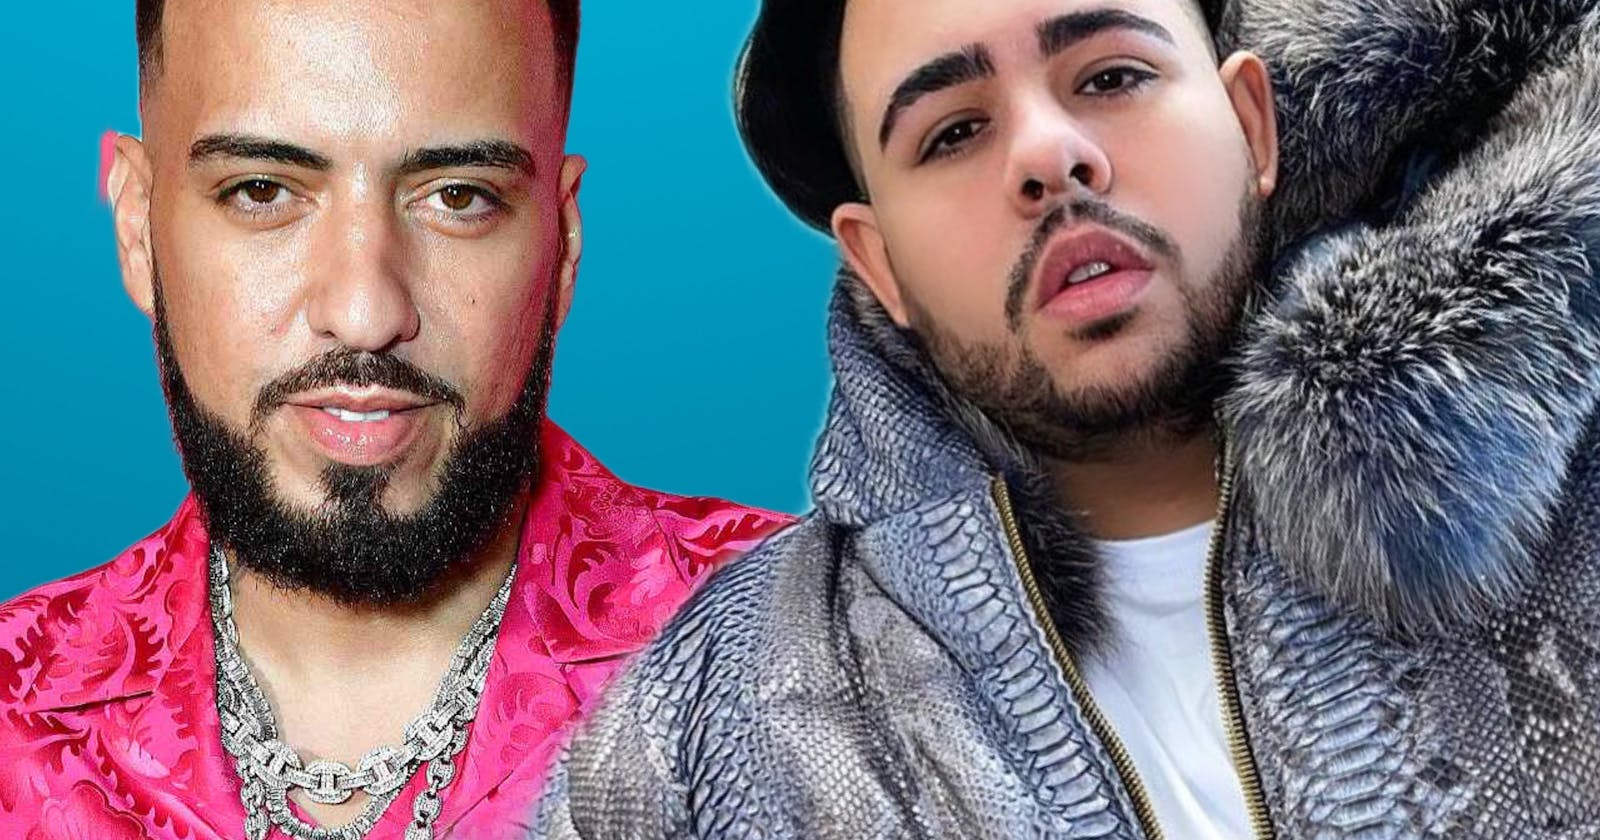 "Rysovalid and French Montana's new single "Run Da City" partners with Tapped Ai